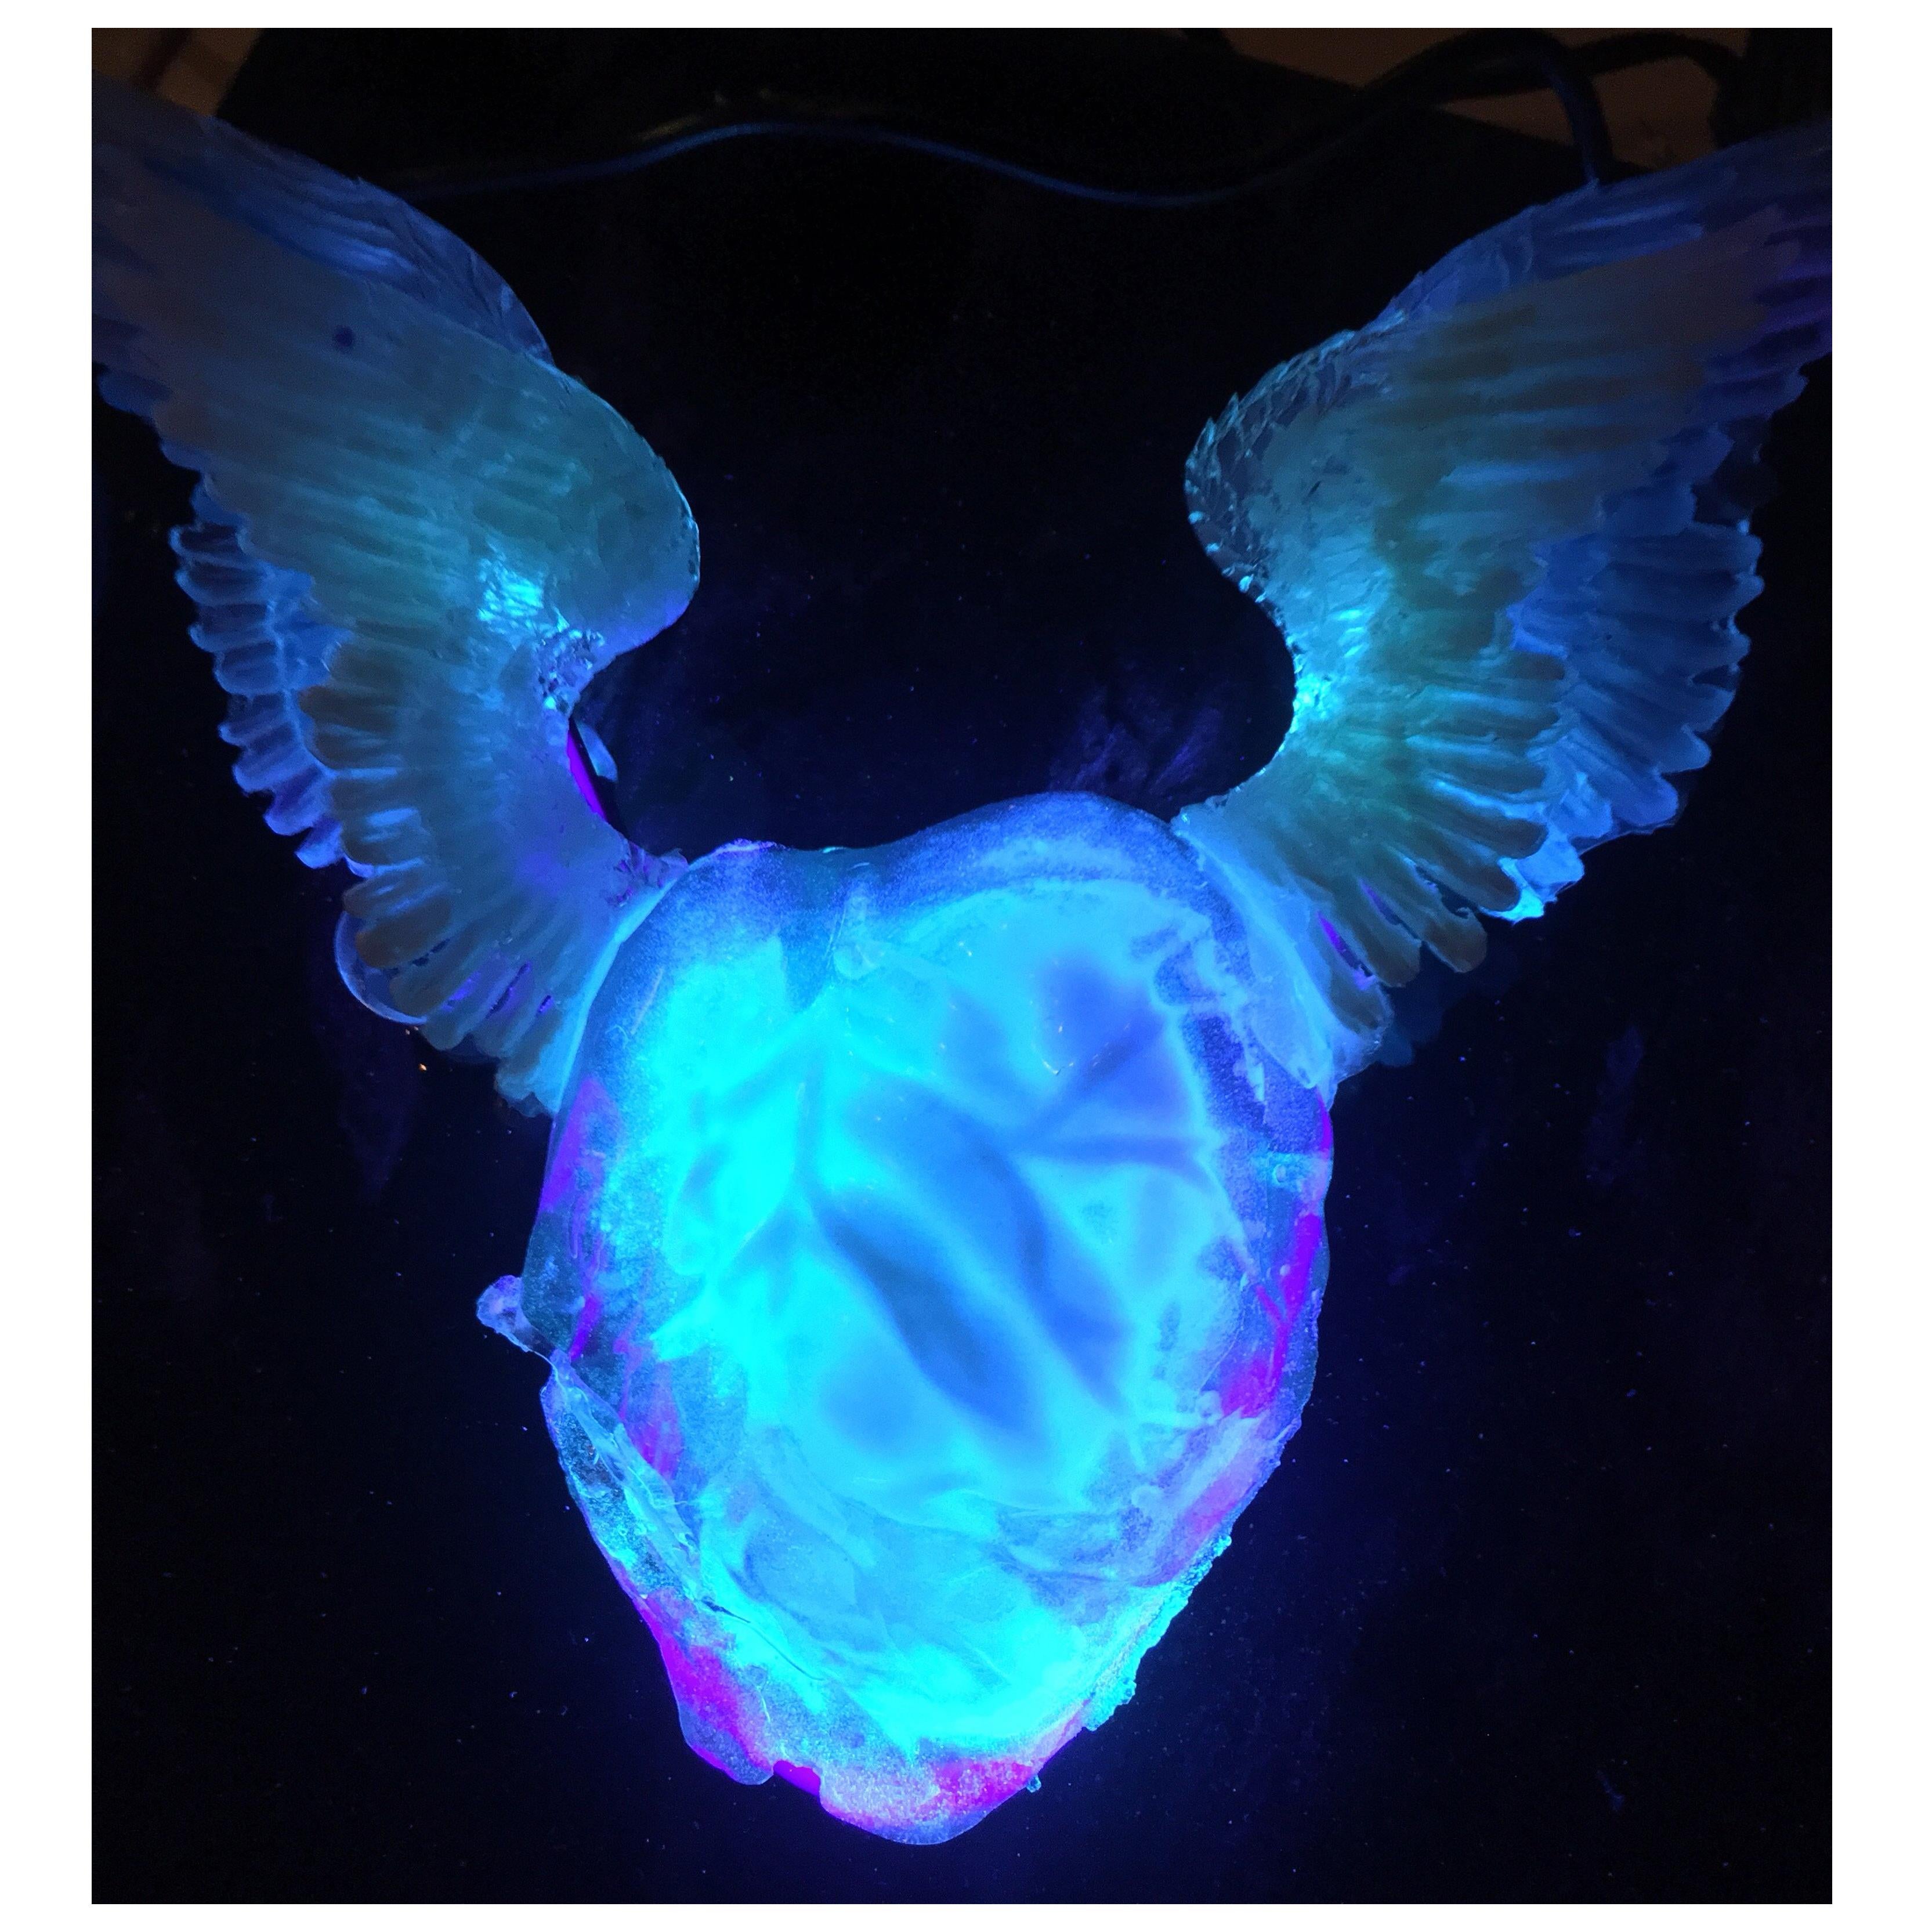 Black Neon Heart and Wings #3 Black Glass Illuminates This Resin Sculpture Moder